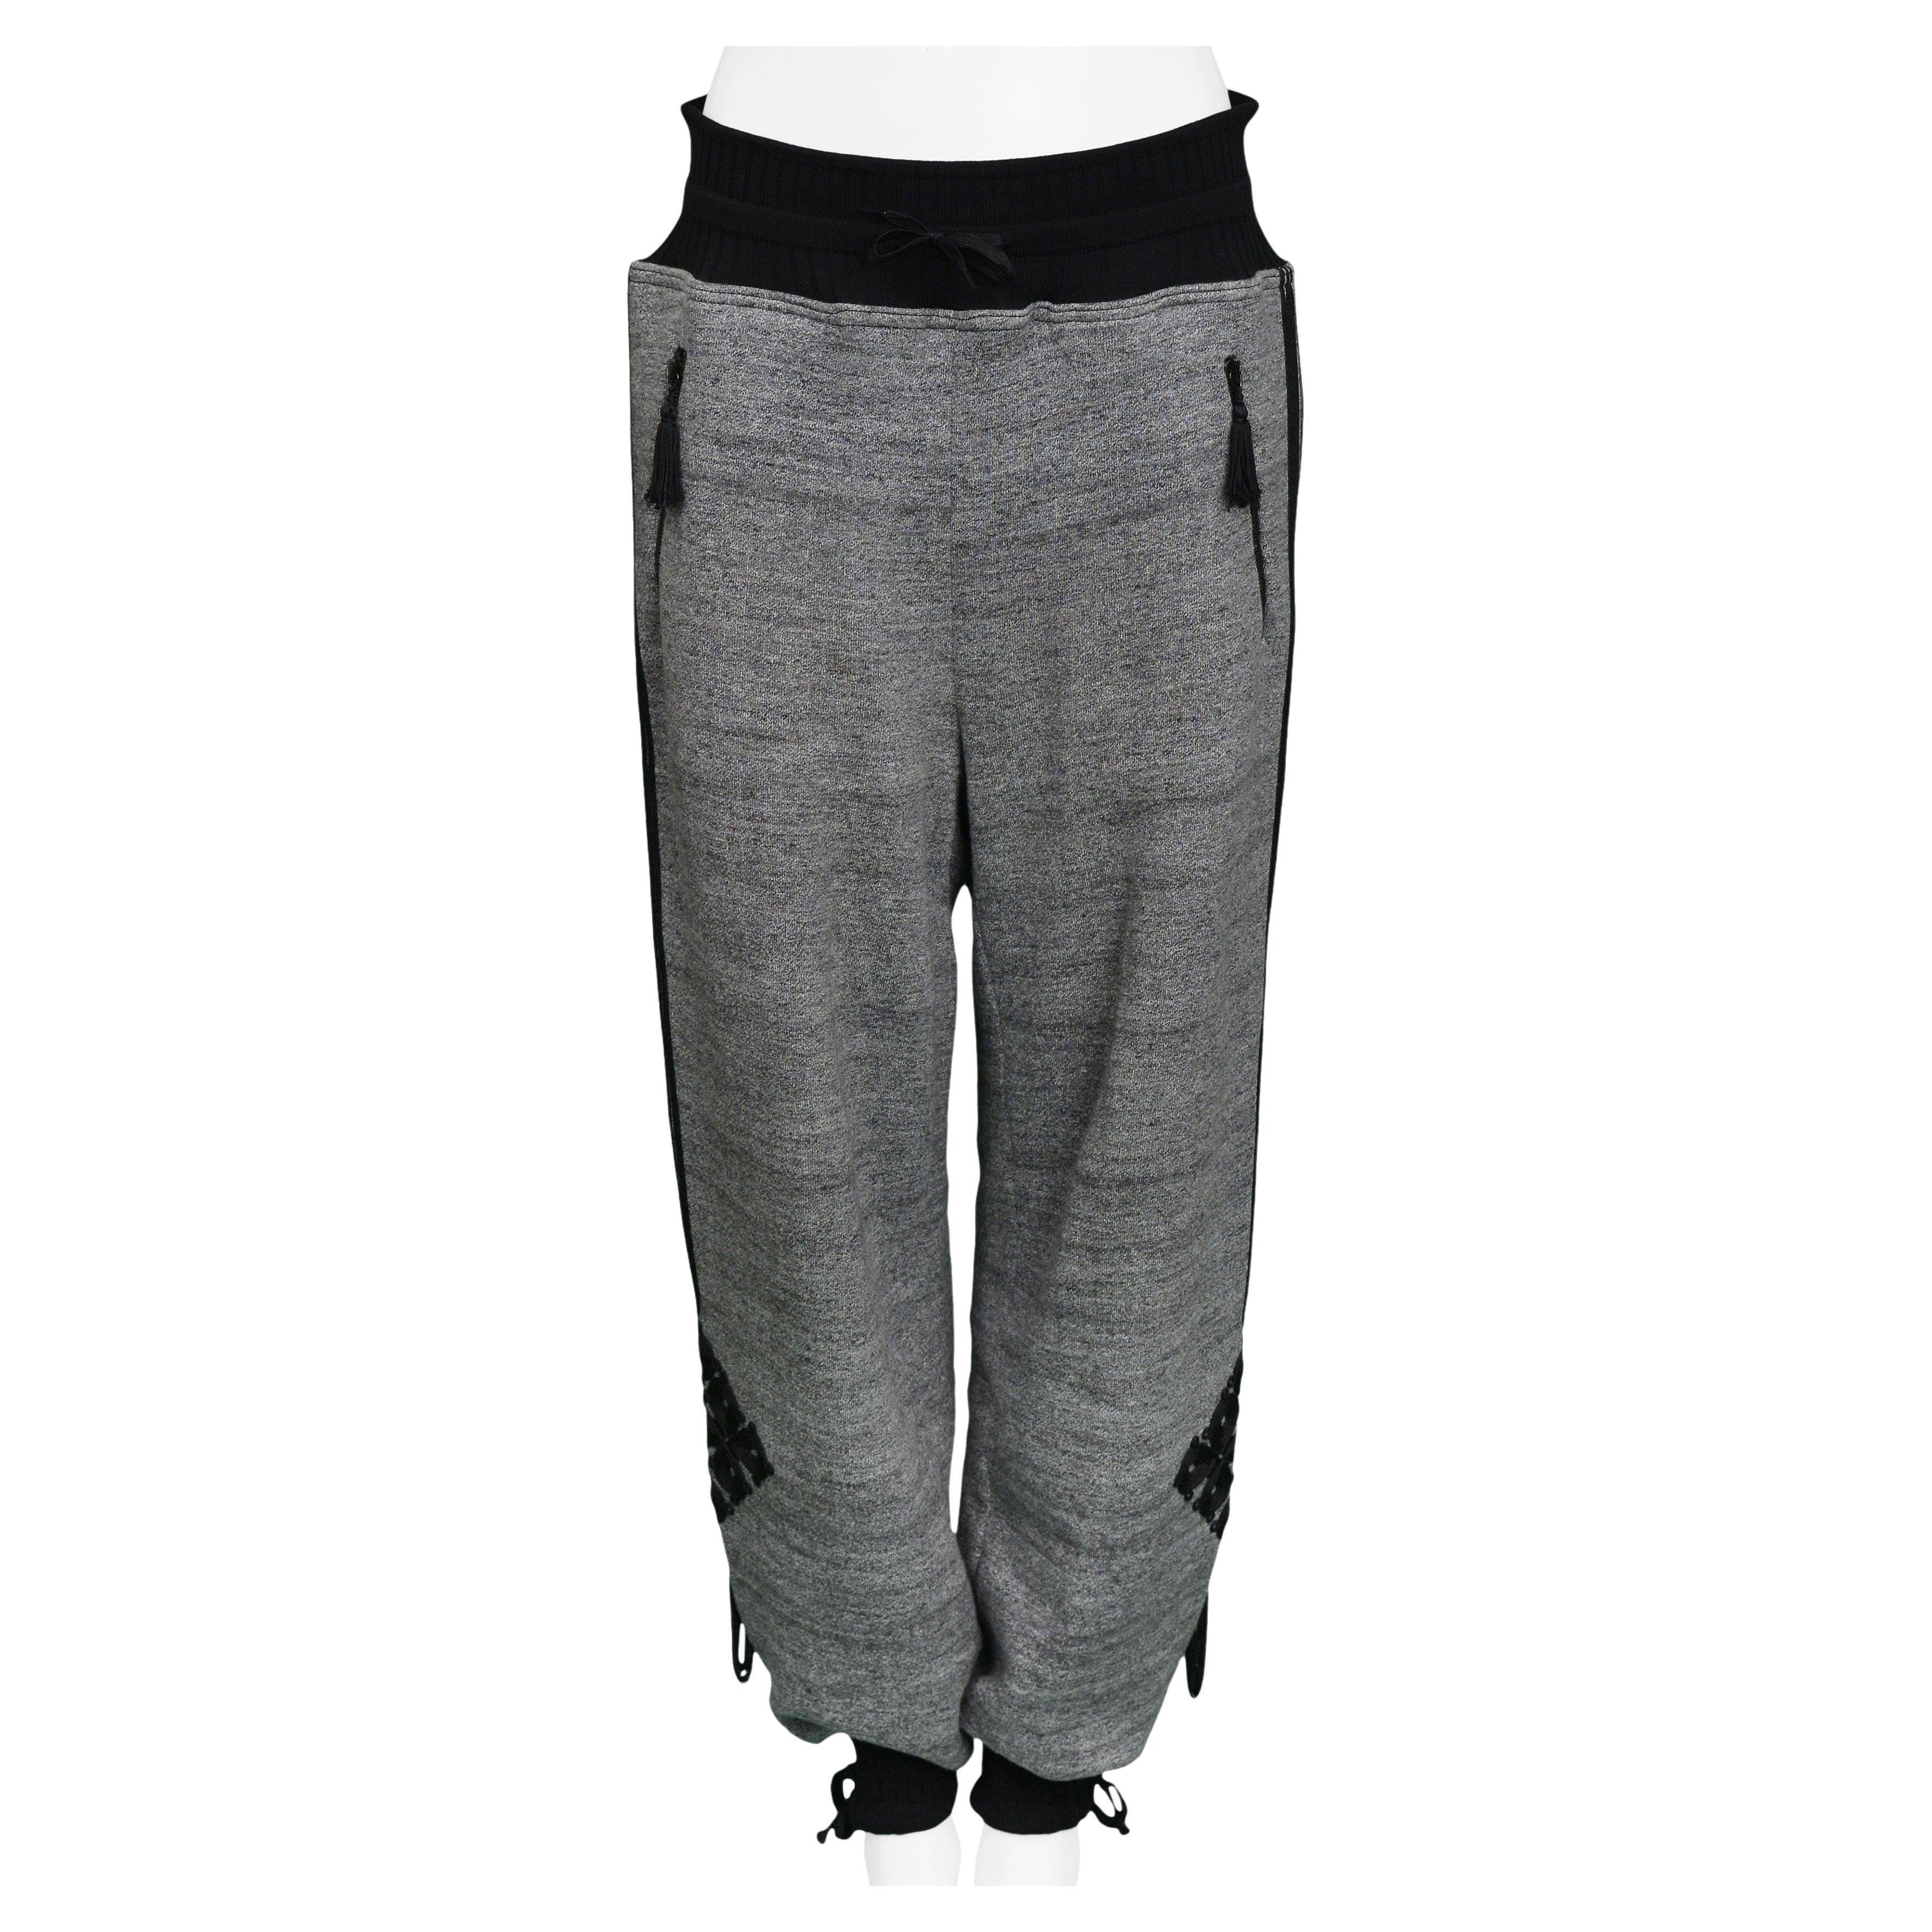 Gaultier Grey Sweatpants With Embroidery 2010 For Sale